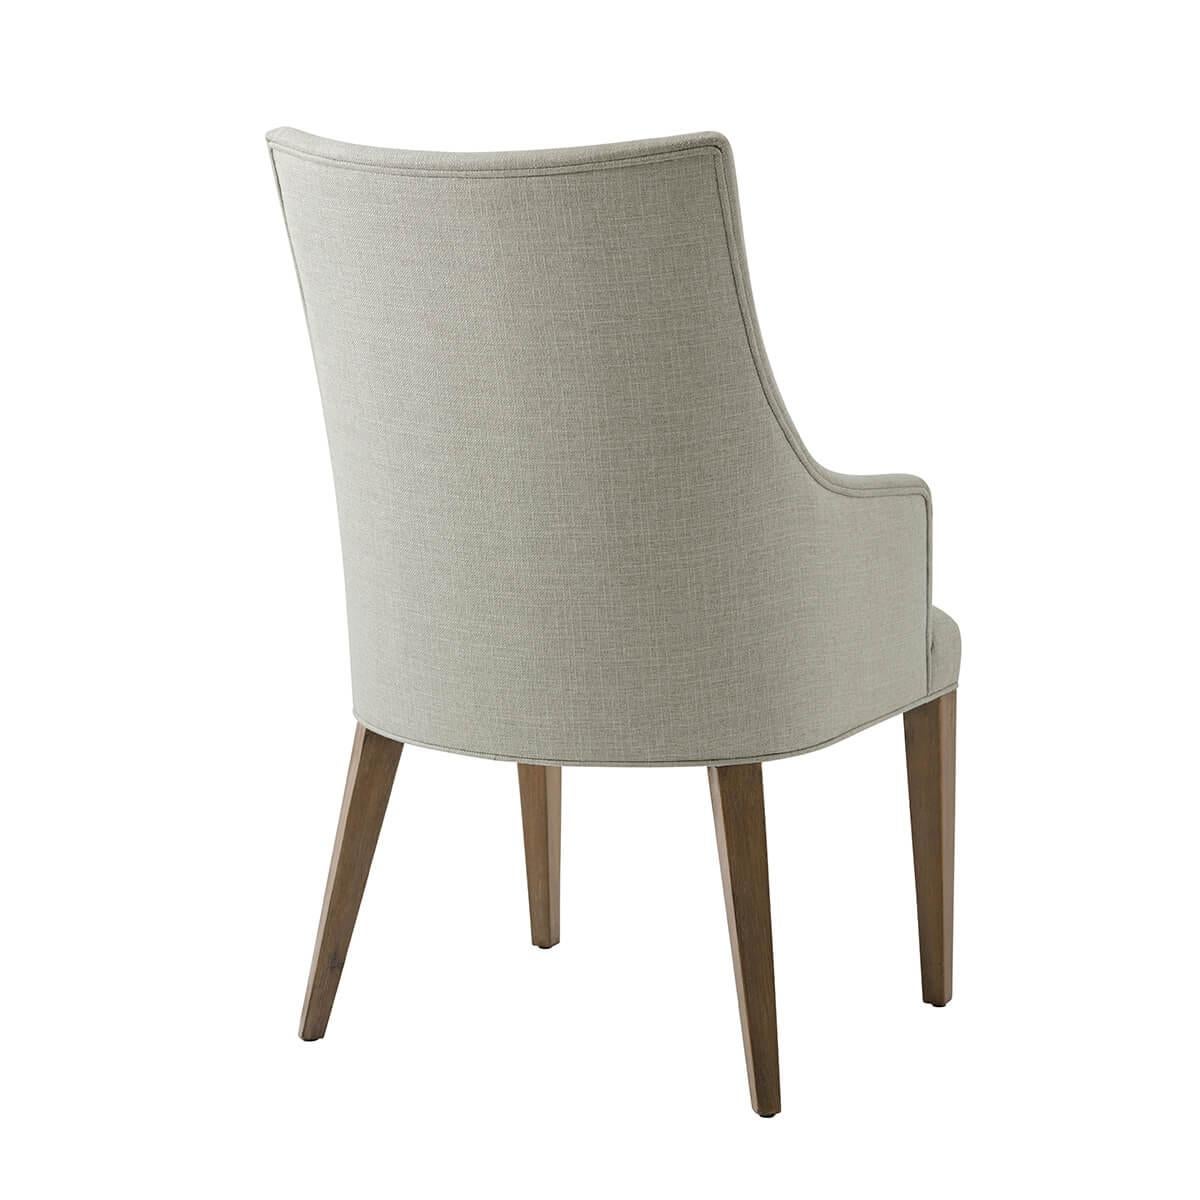 With an upholstered back, arm, and tight seat cushion, in the Draper performance fabric, with traditional square tapered legs in our light mangrove finish.

 
Dimensions: 22